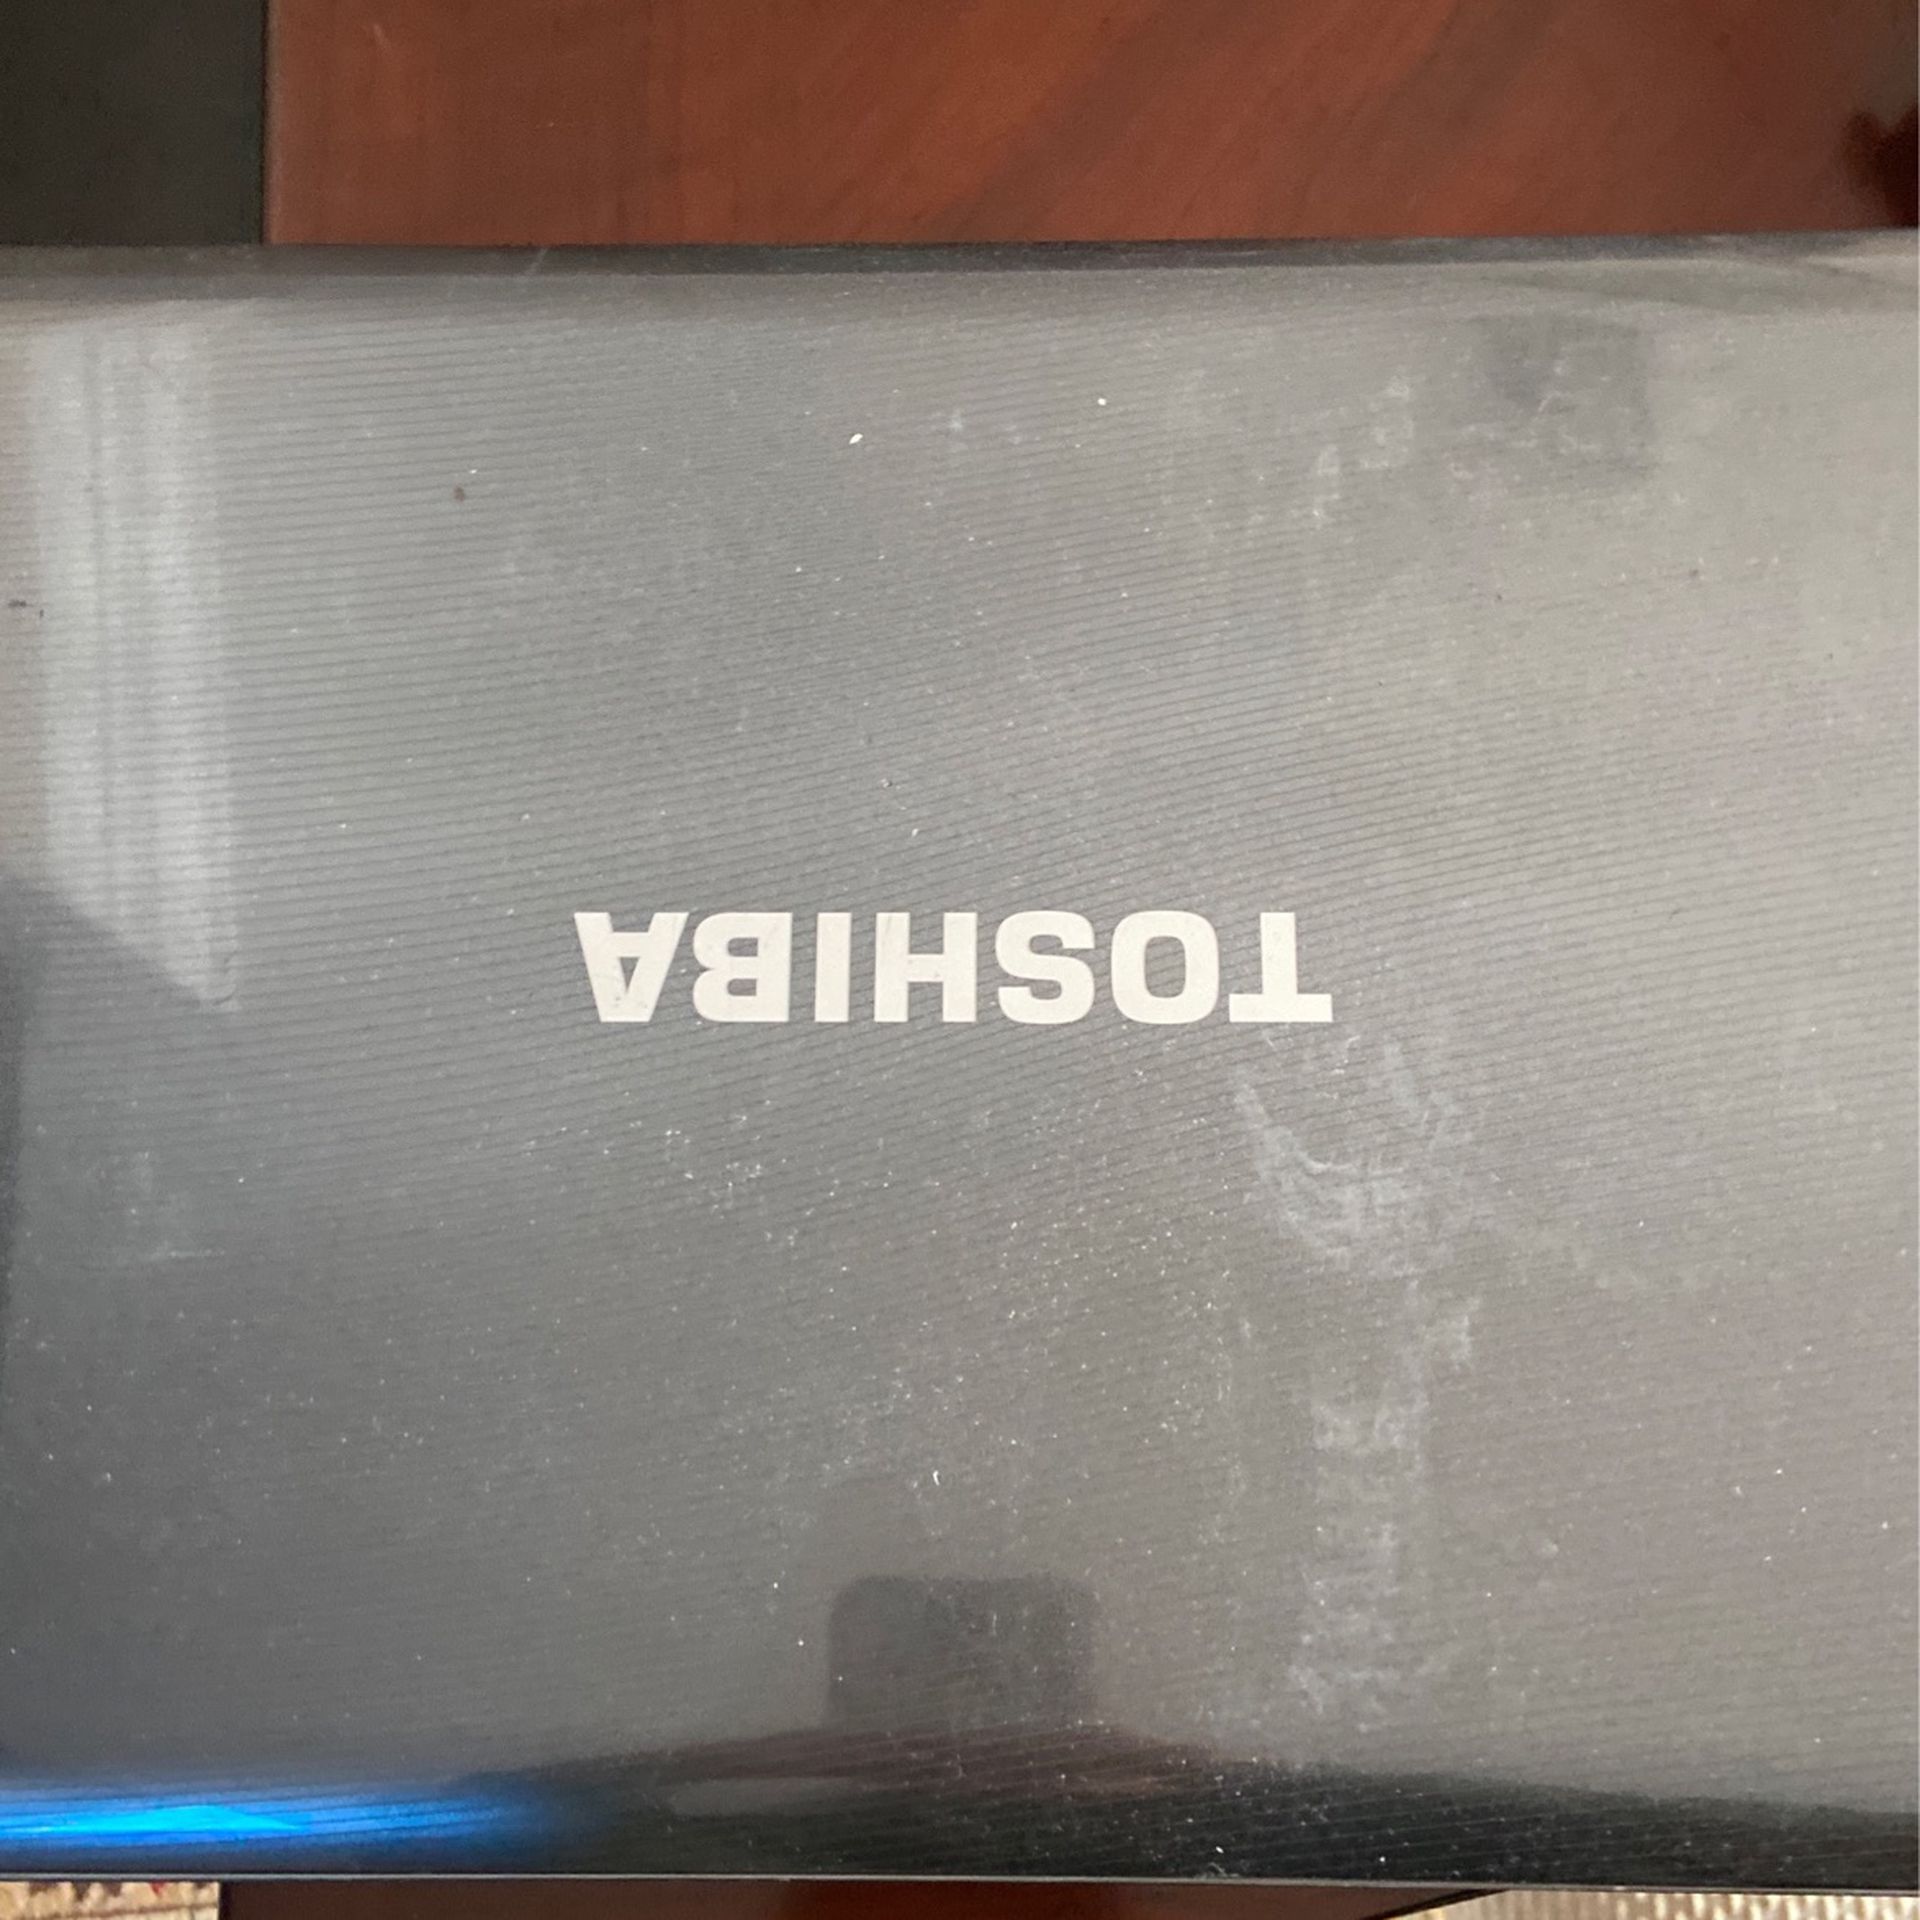 Toshiba Laptop (No charger) - L505D-S5965